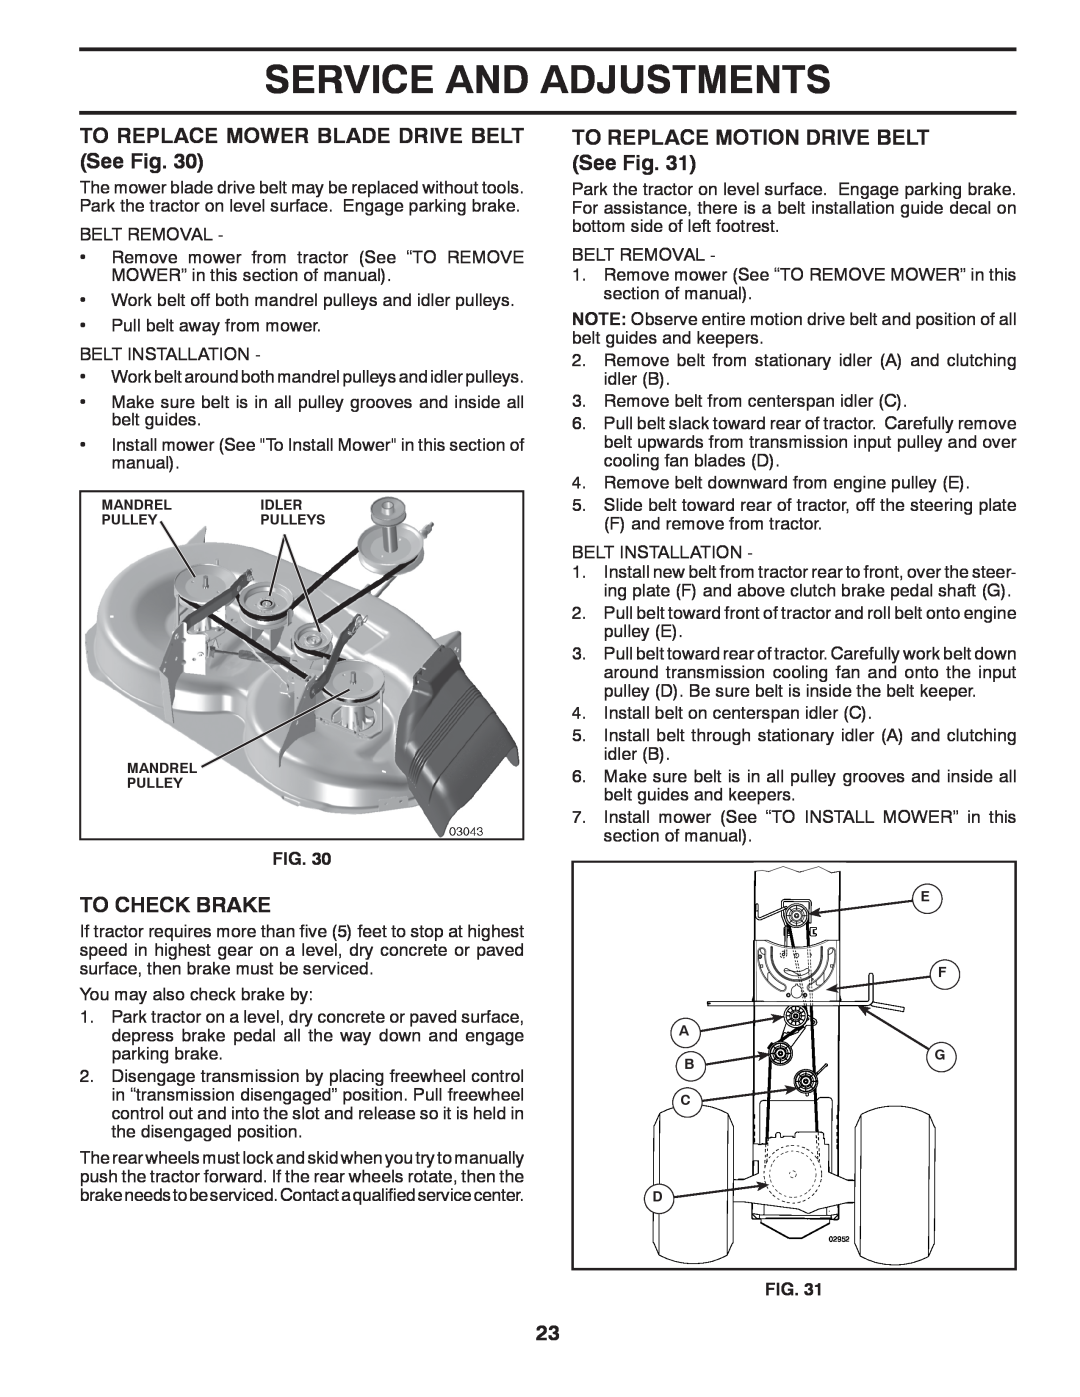 Poulan 420408, PP17538HP, 96041007302 Service And Adjustments, TO REPLACE MOWER BLADE DRIVE BELT See Fig, To Check Brake 